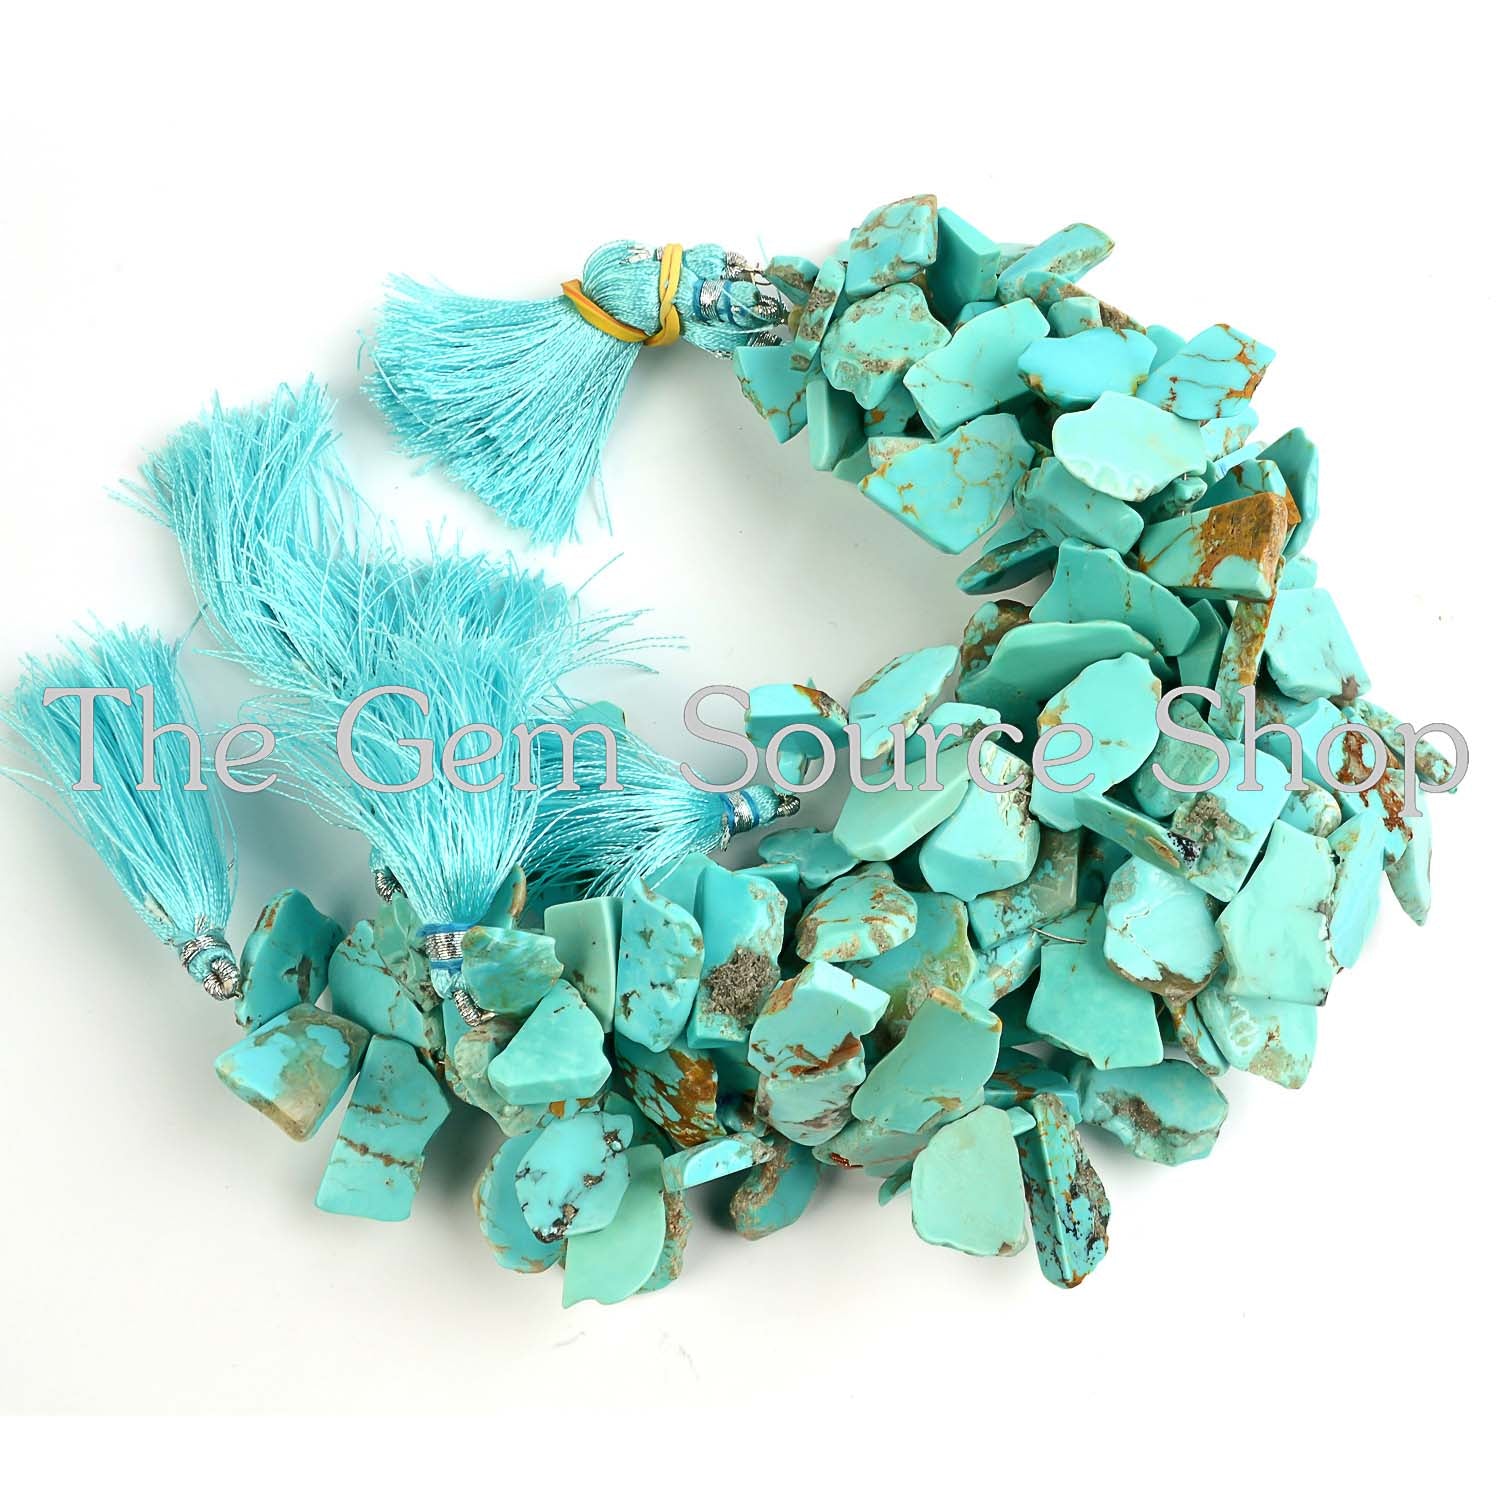 Natural Turquoise Smooth Slices Shape Gemstone Beads